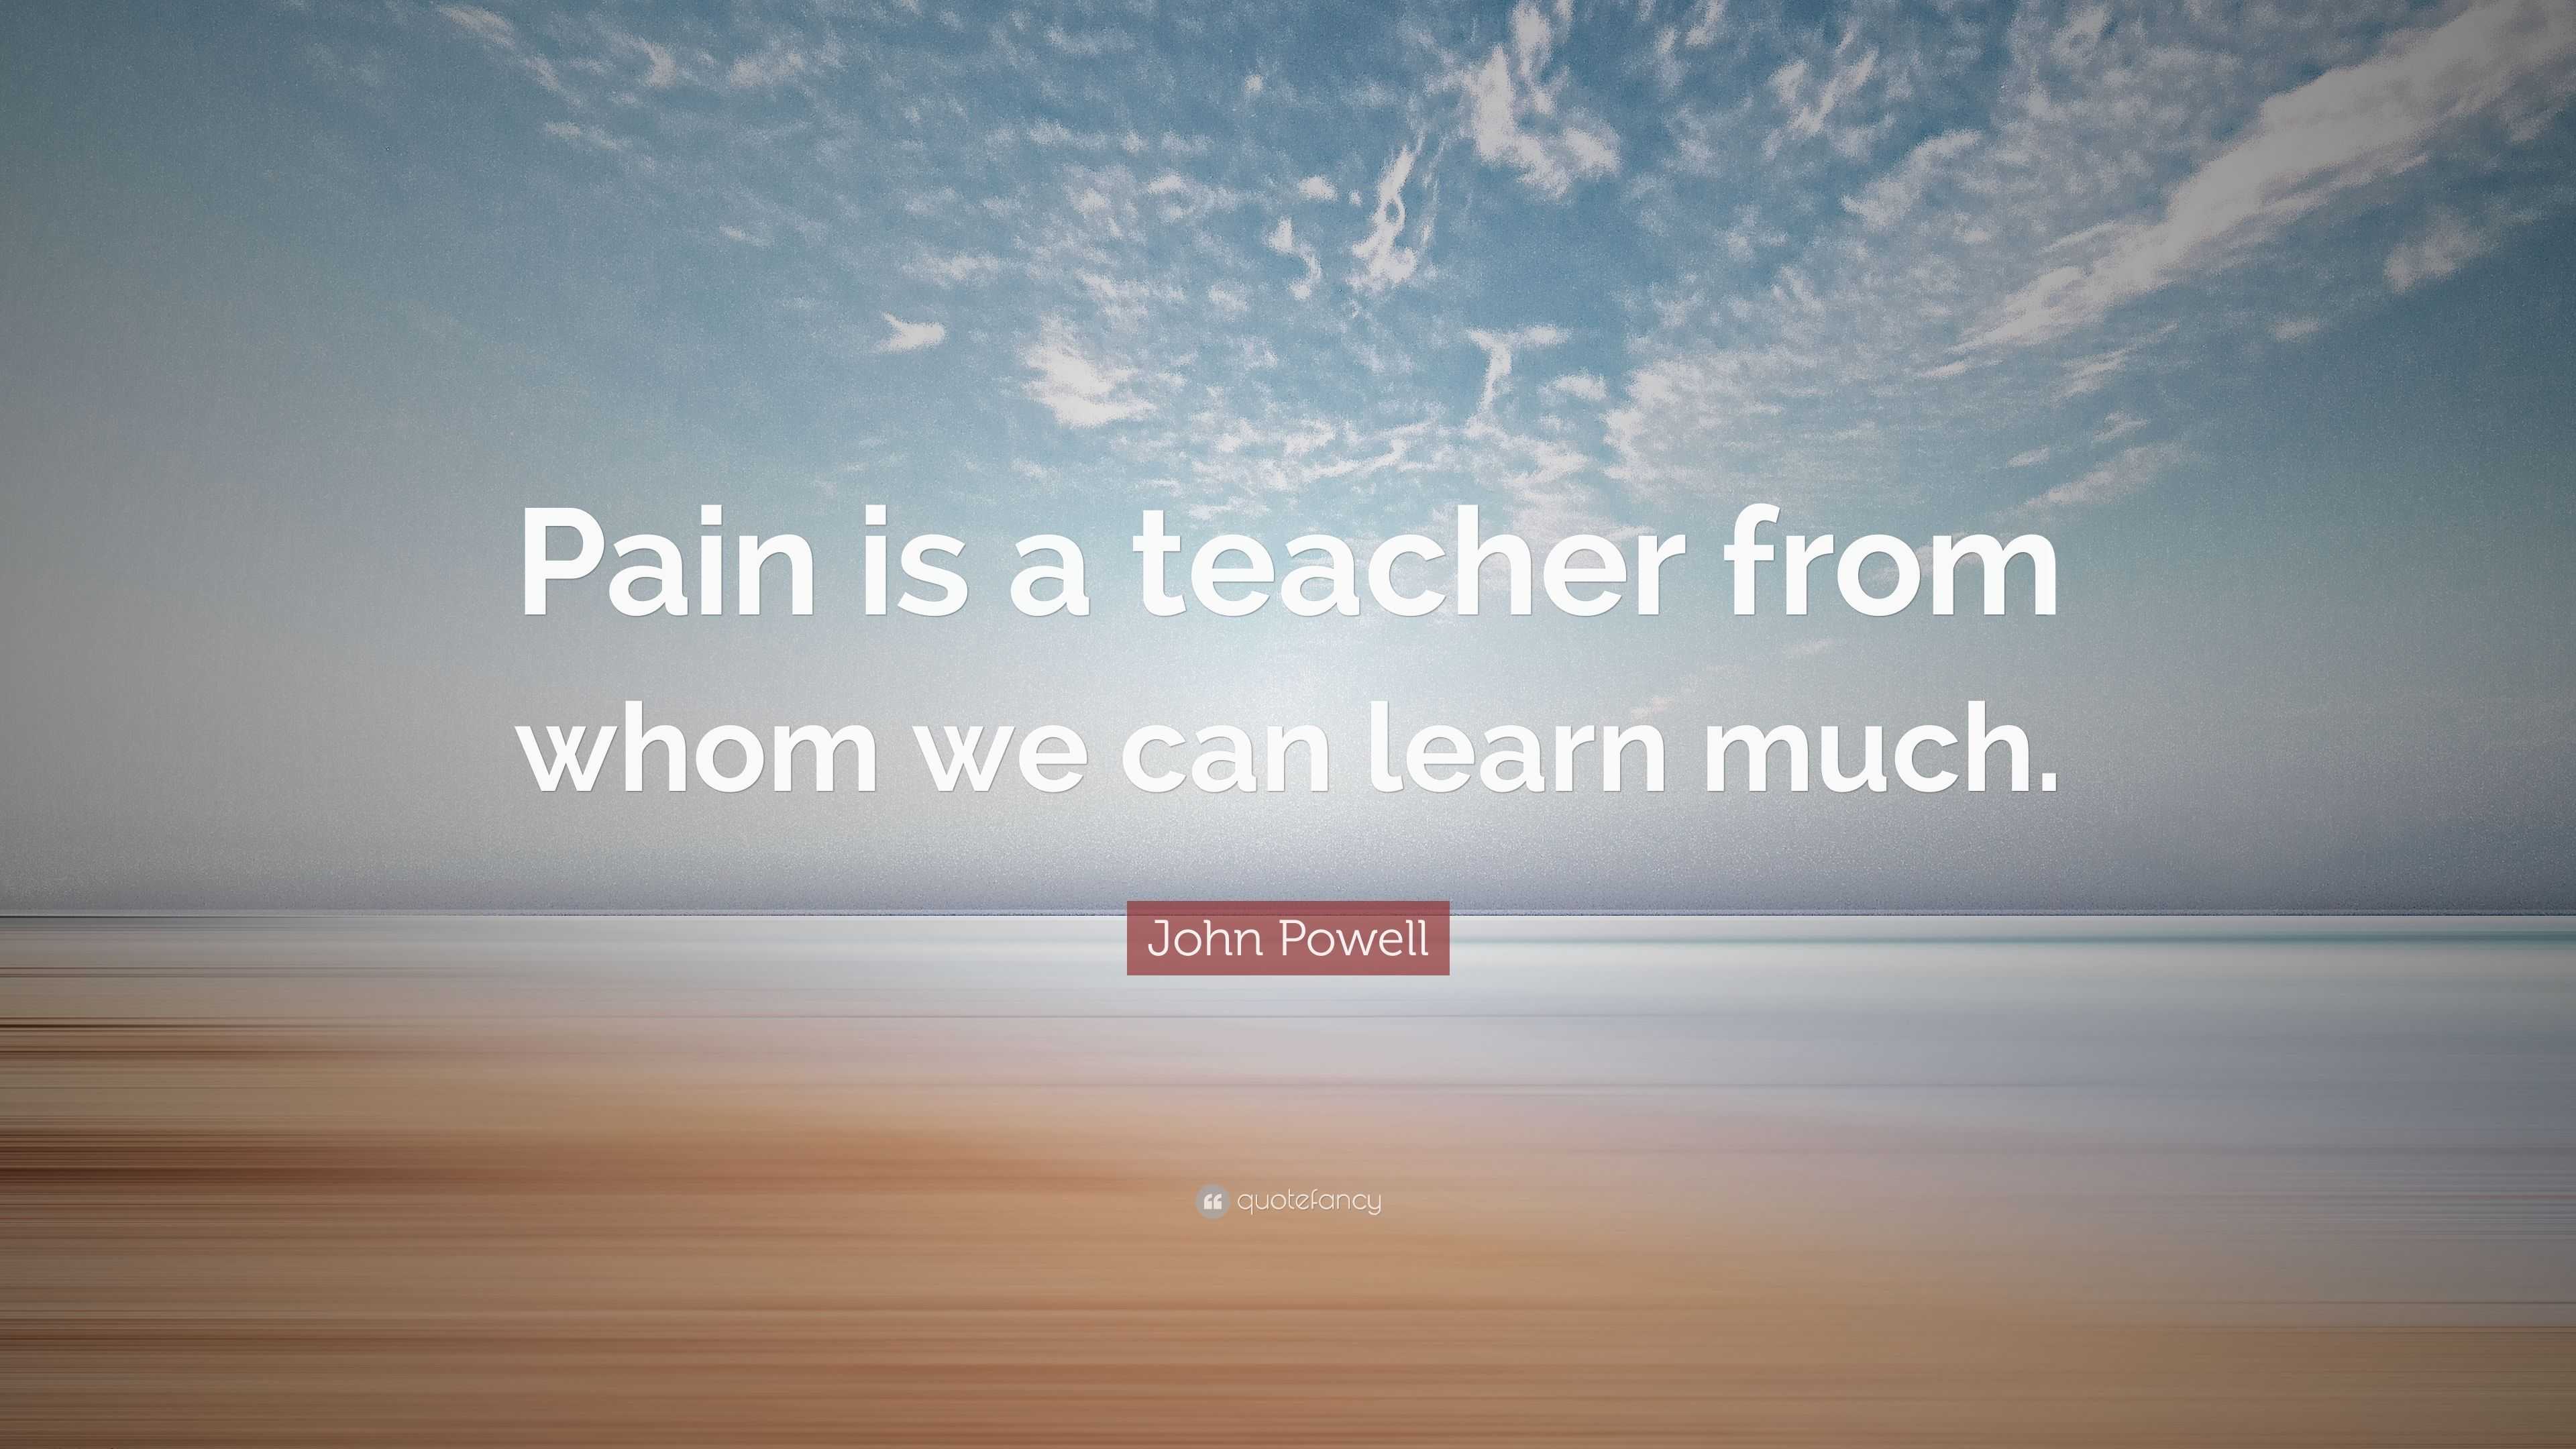 John Powell Quote: “Pain is a teacher from whom we can learn much.”